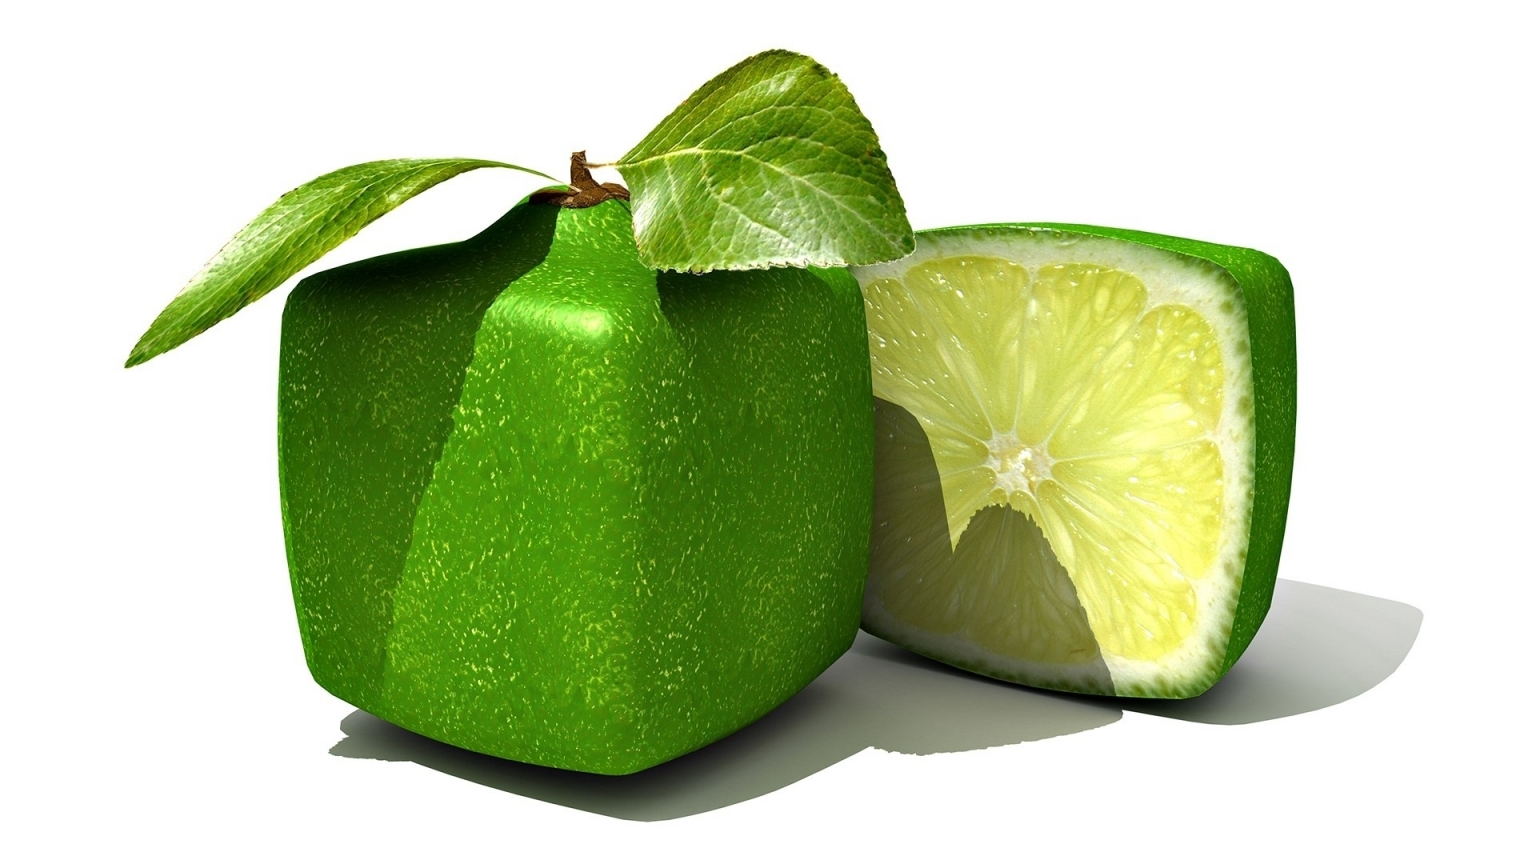 Square Limes for 1536 x 864 HDTV resolution